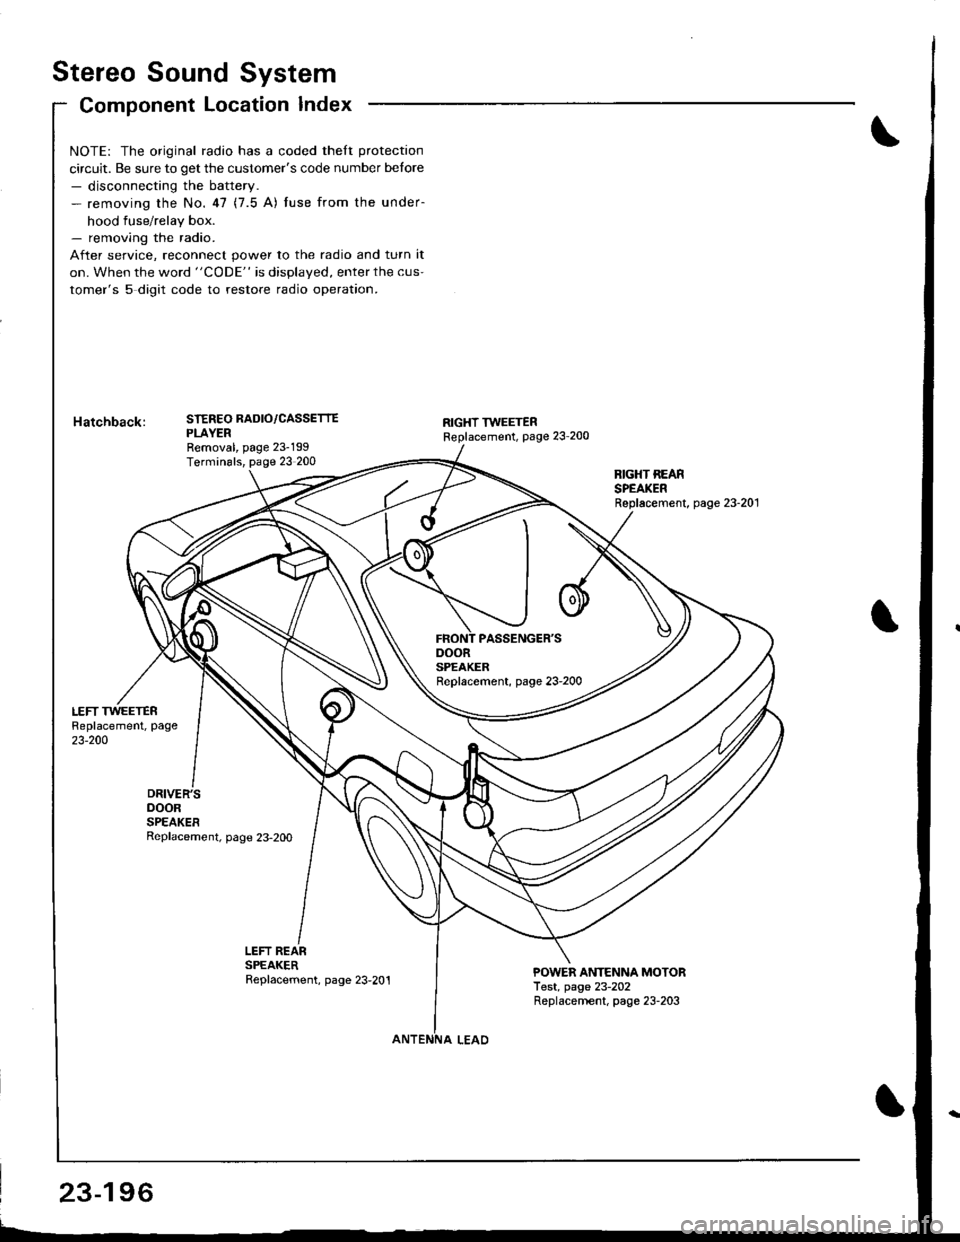 HONDA INTEGRA 1998 4.G User Guide Stereo Sound System
Component Location Index
DOORSPEAKERReplacement, page 23-2OO
NOTE: The original radio has a coded theft protection
circuit. Be sure to get the customers code number betore- discon